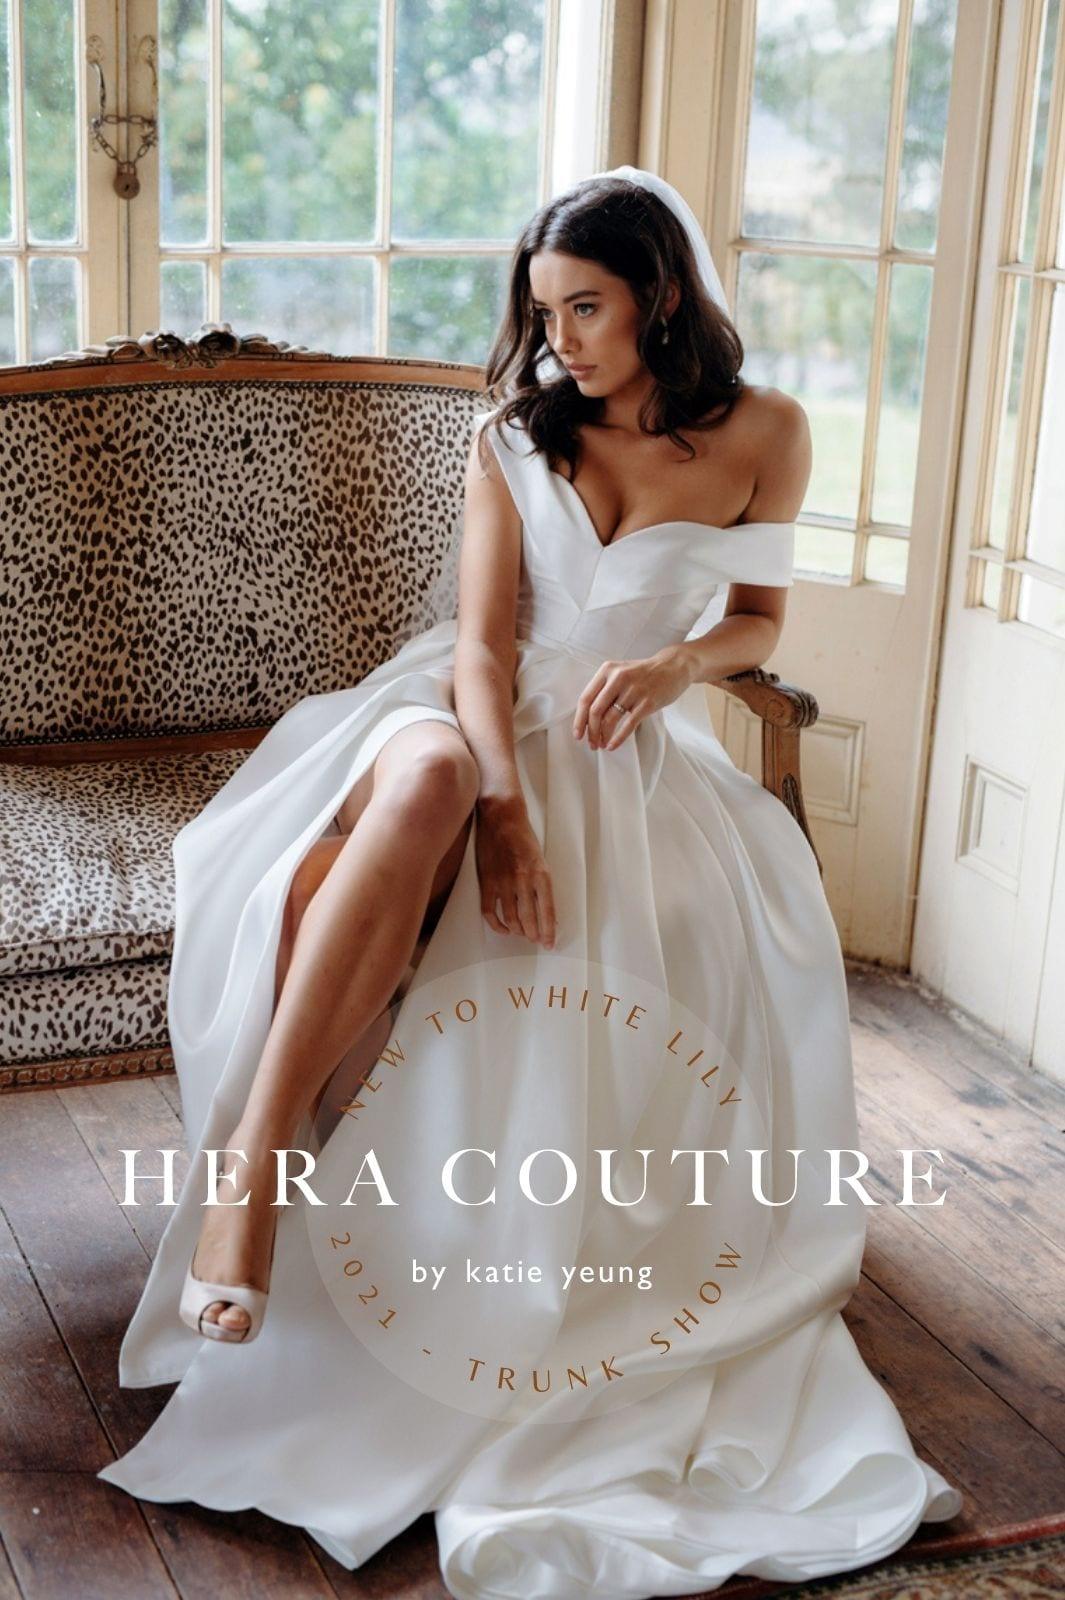 For a Limited Time - Hera Couture by Katie Yeung – White Lily Couture